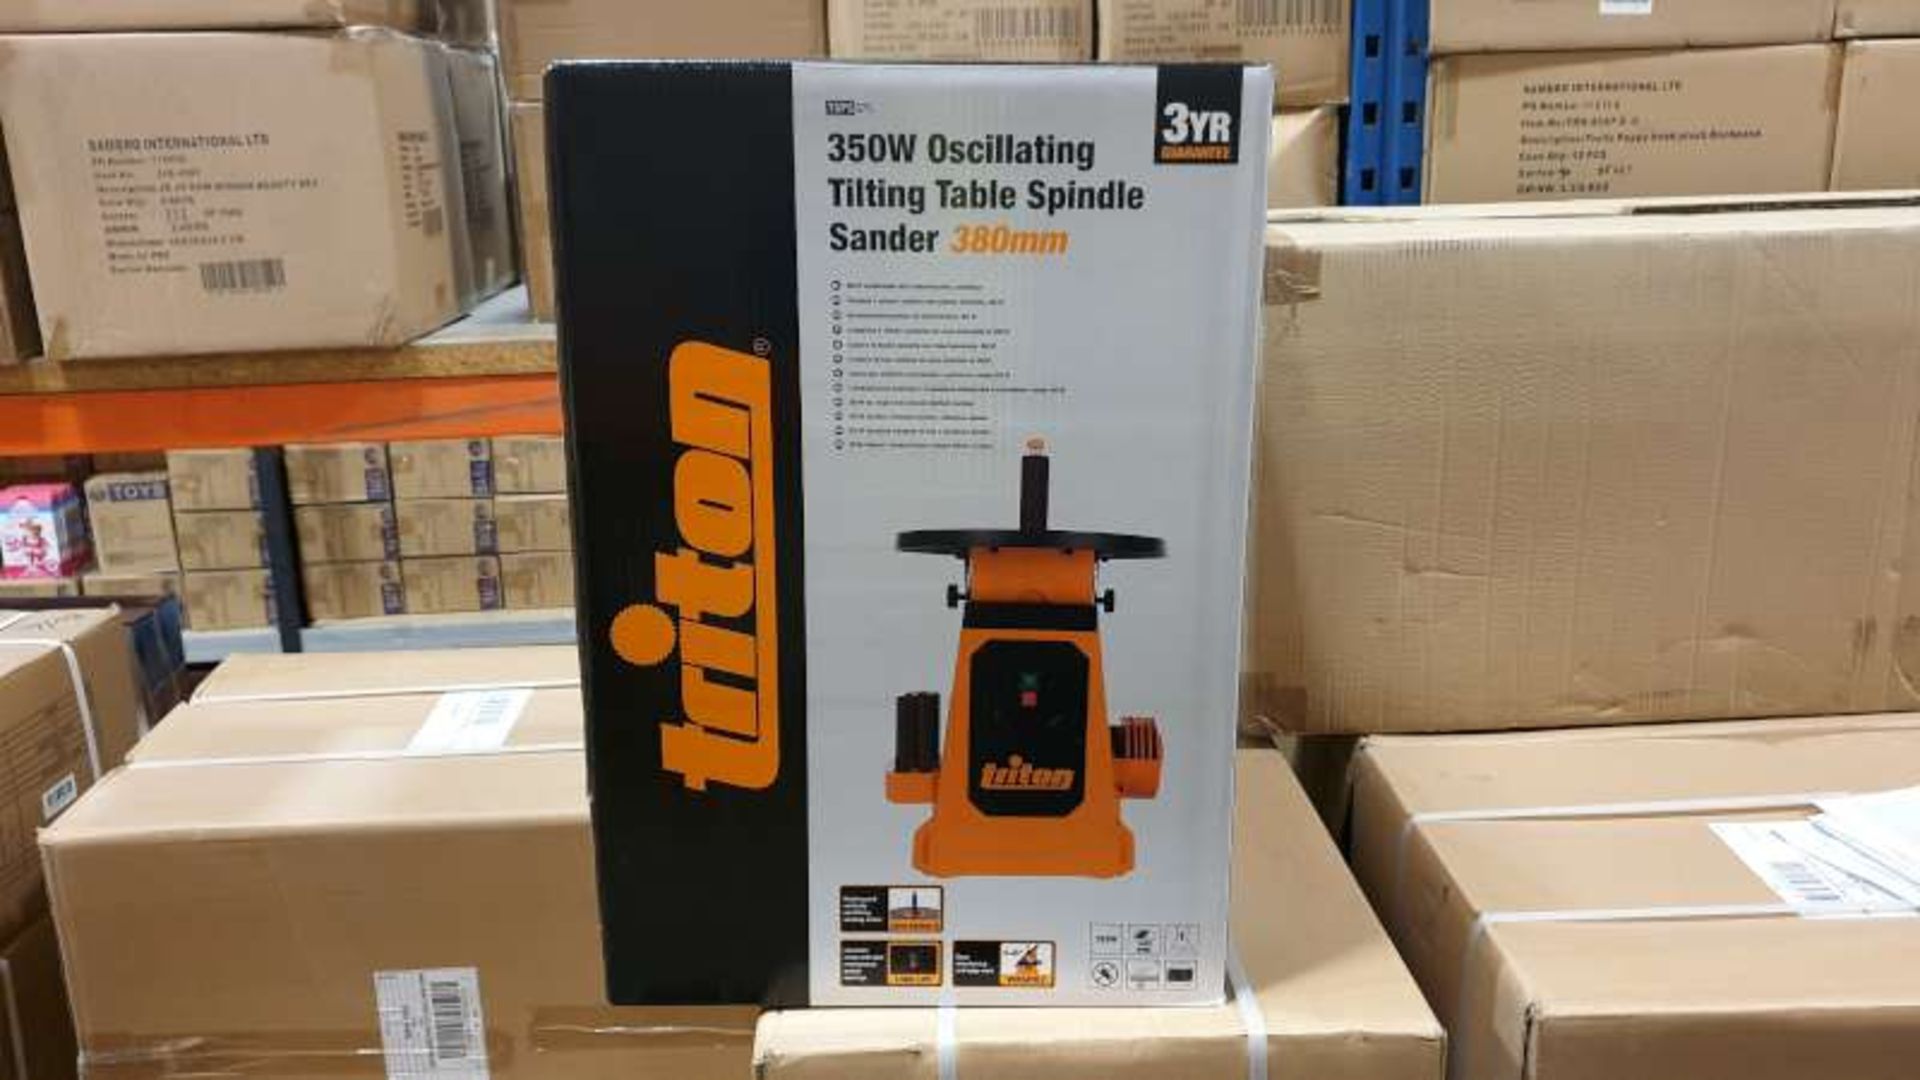 BRAND NEW BOXED TRITON 350W OSCILLATING TILTING TABLE SPINDLE SANDER 380MM WITH 3 YEARS